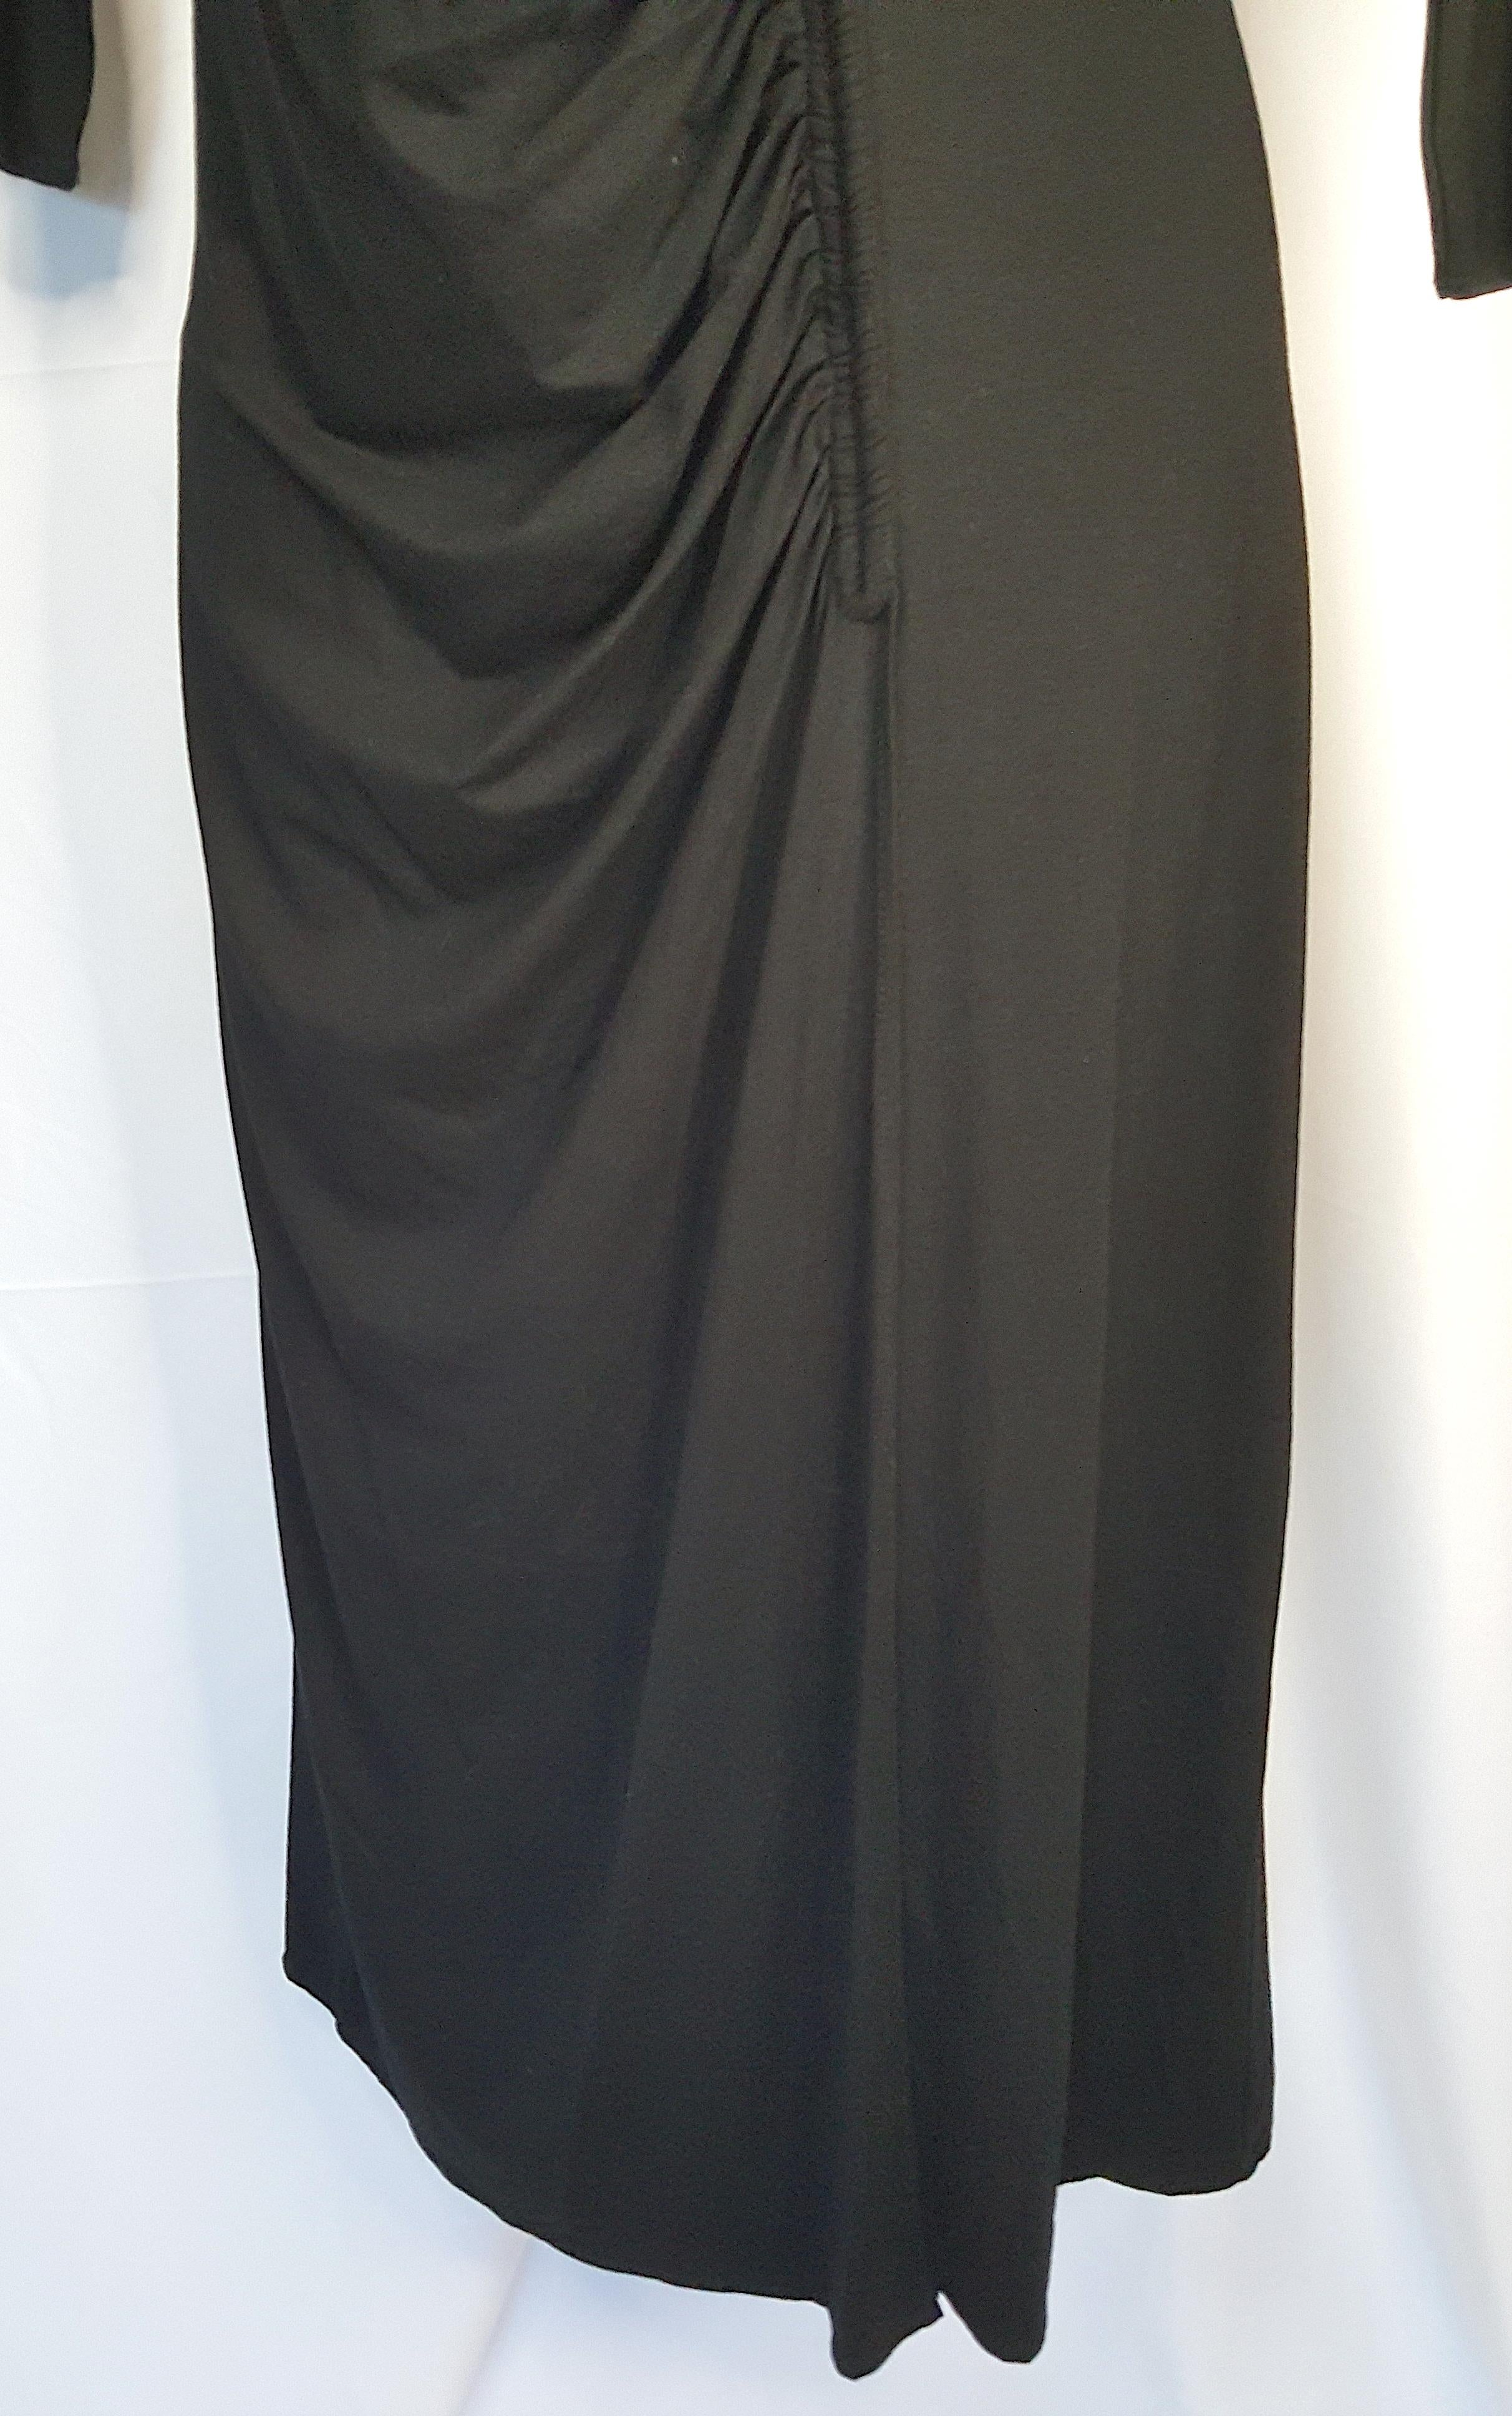 MartinMargiela S/S2008 PlungingVneck Bias Ruched Halter SlitDress Black Top In Excellent Condition For Sale In Chicago, IL